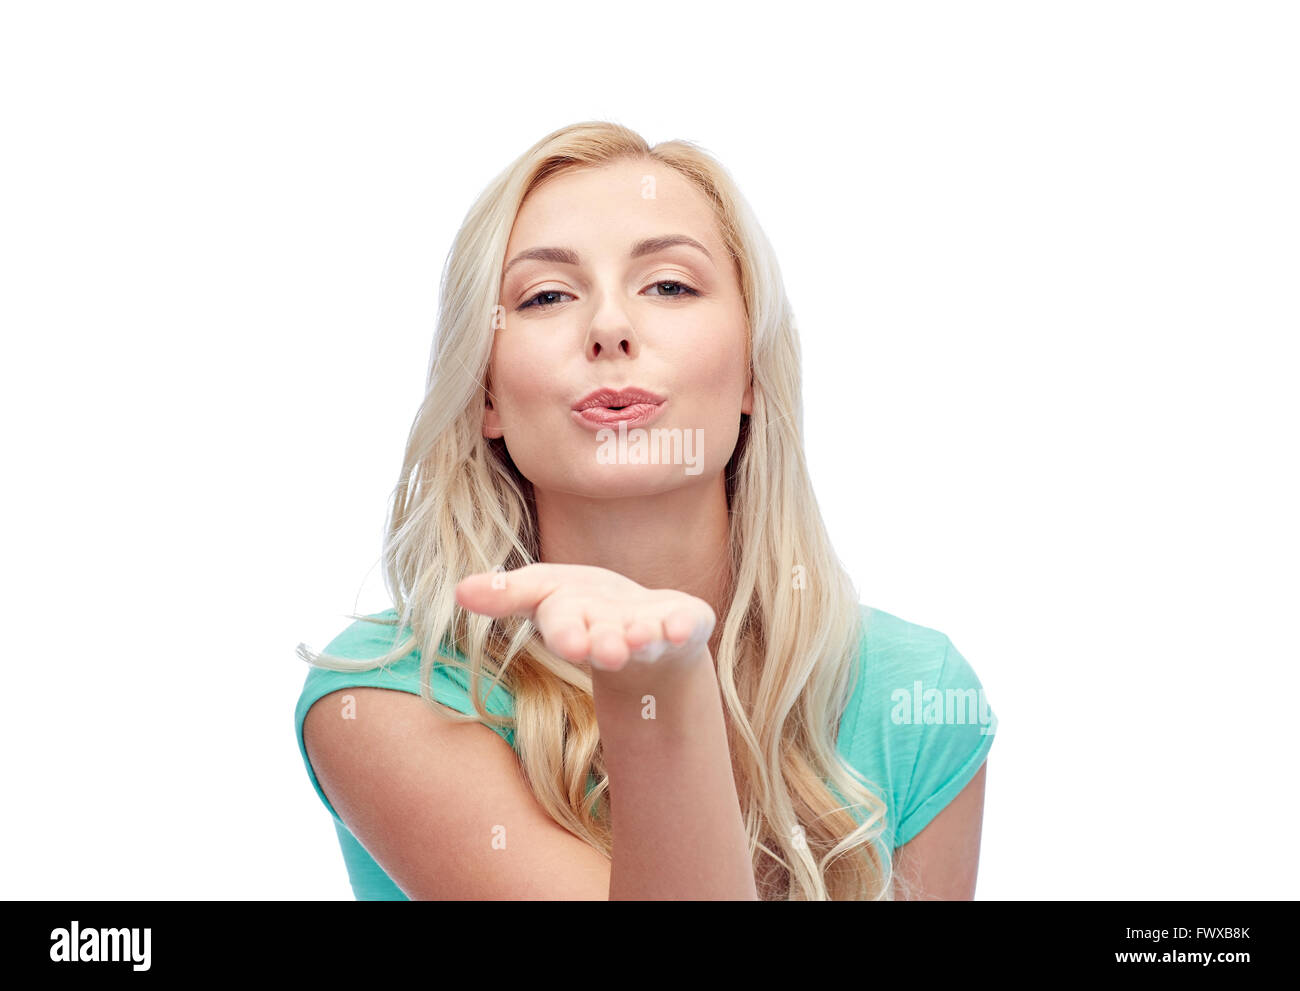 smiling young woman or teen girl sending blow kiss Stock Photo